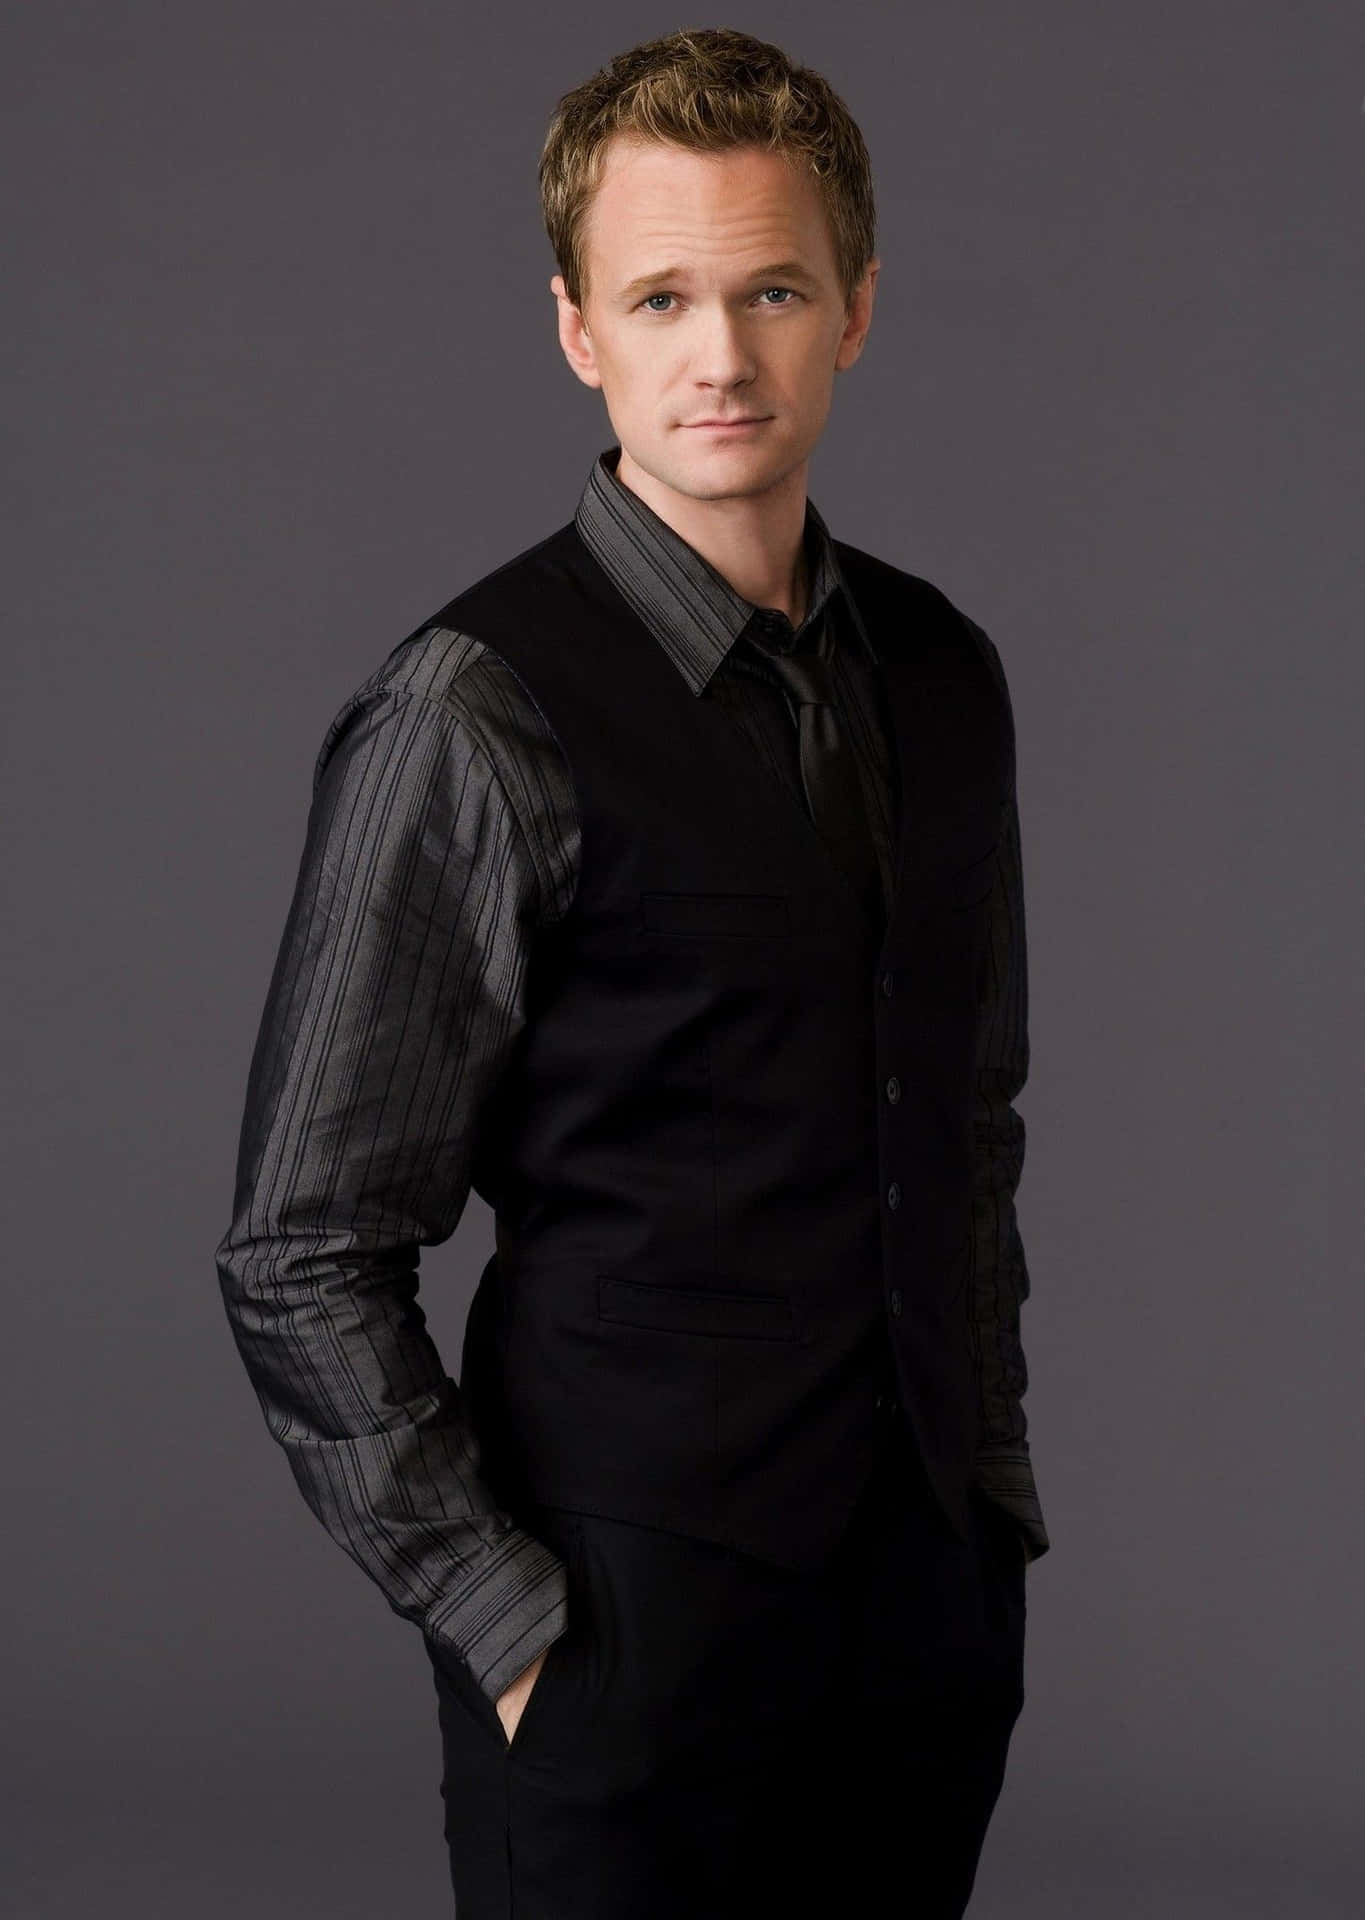 Neil Patrick Harris Posing with a winsome smile Wallpaper